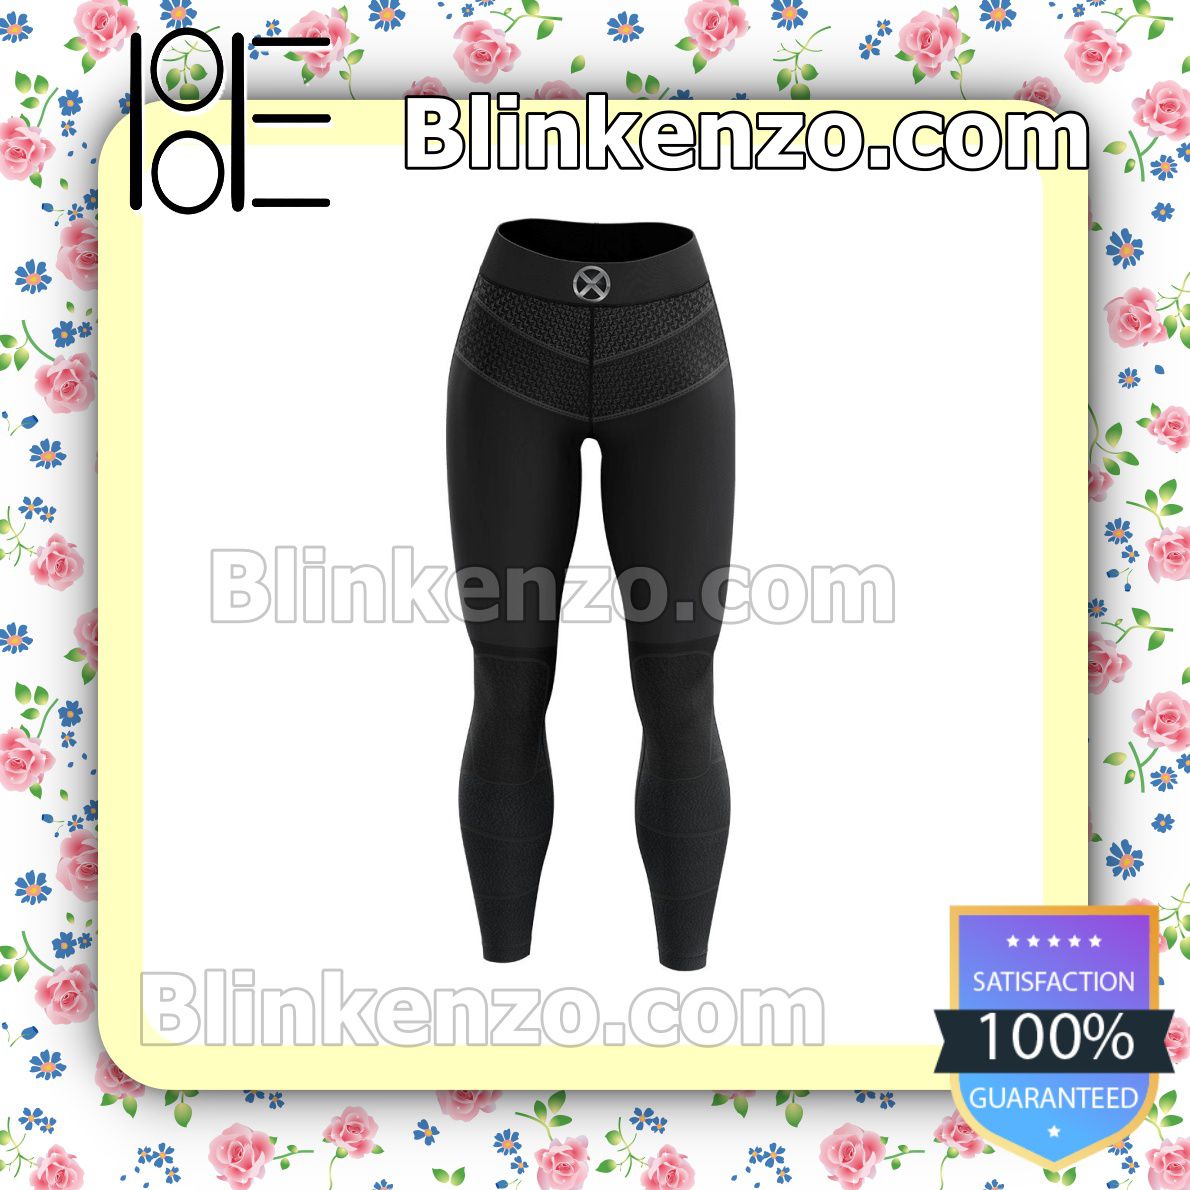 Top Rated Queen Of The Skies Workout Leggings